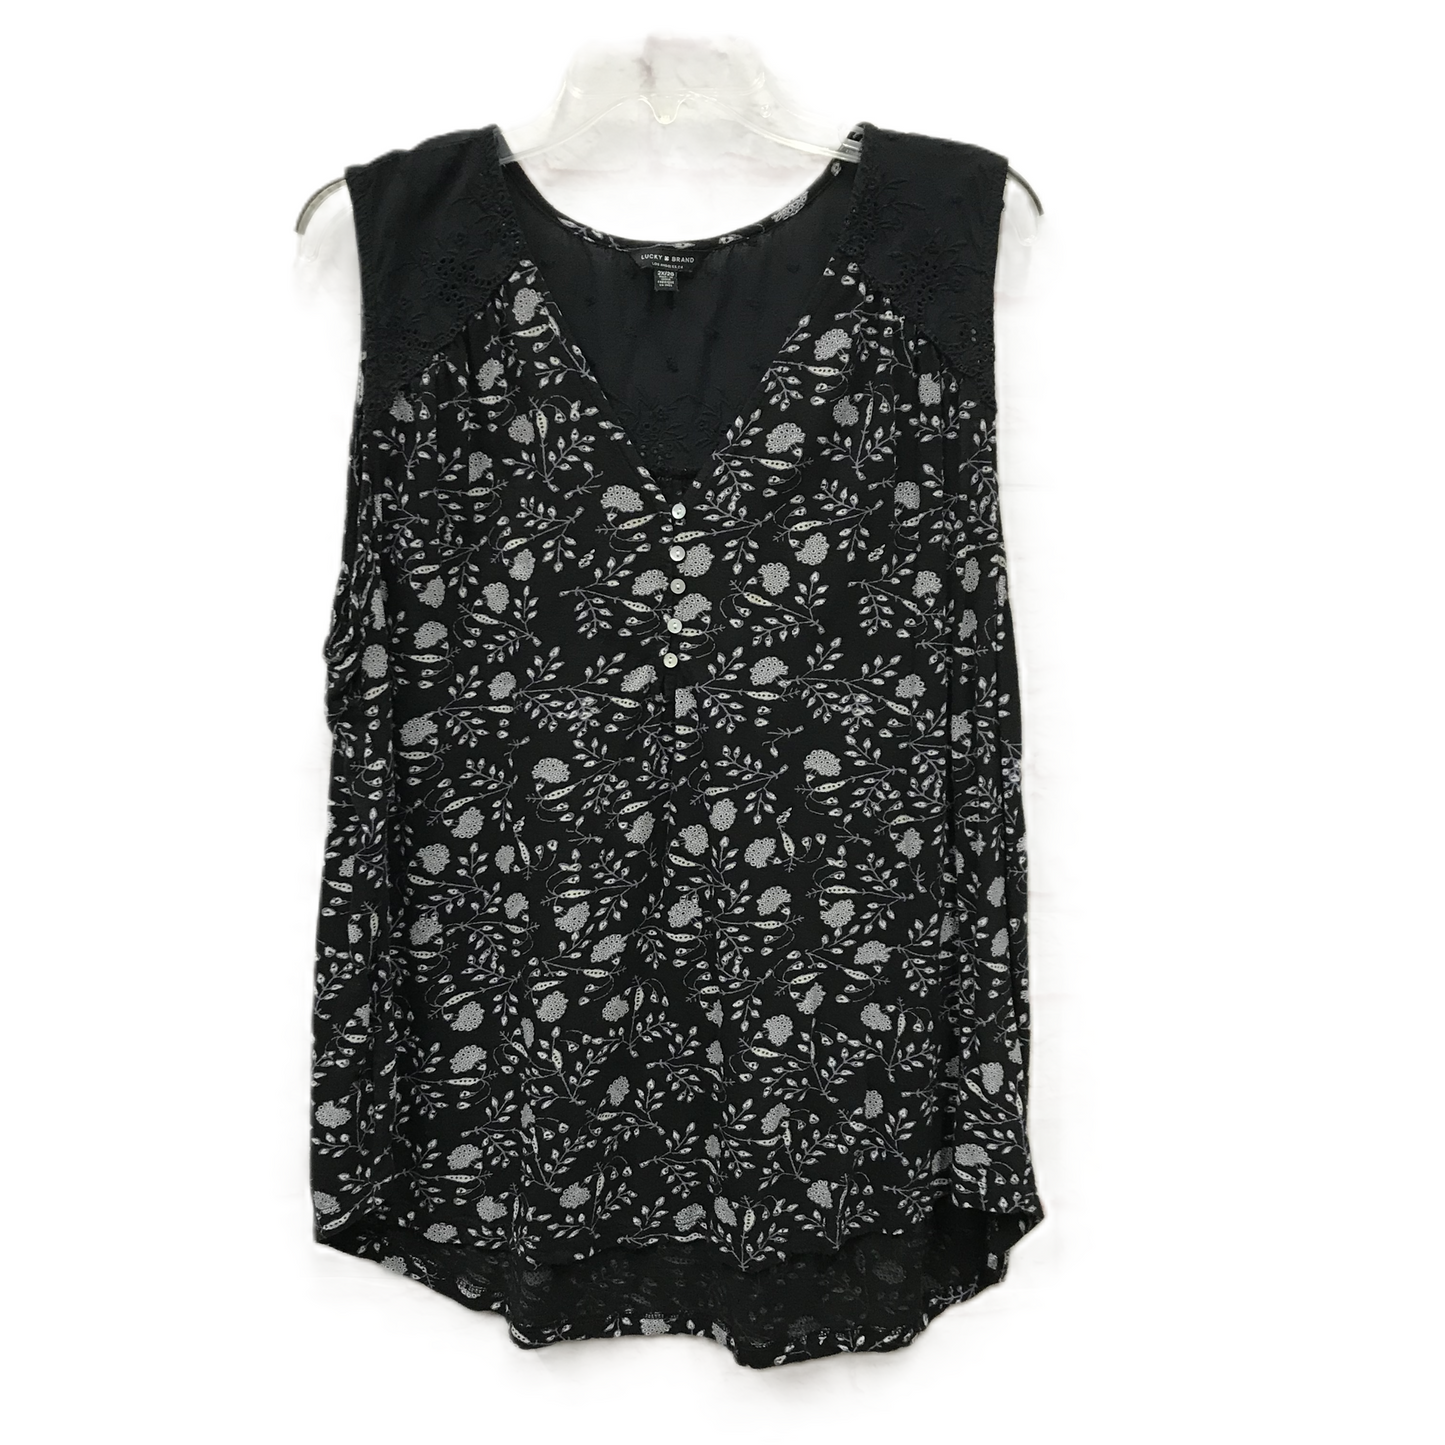 Black Top Sleeveless By Lucky Brand, Size: 2x